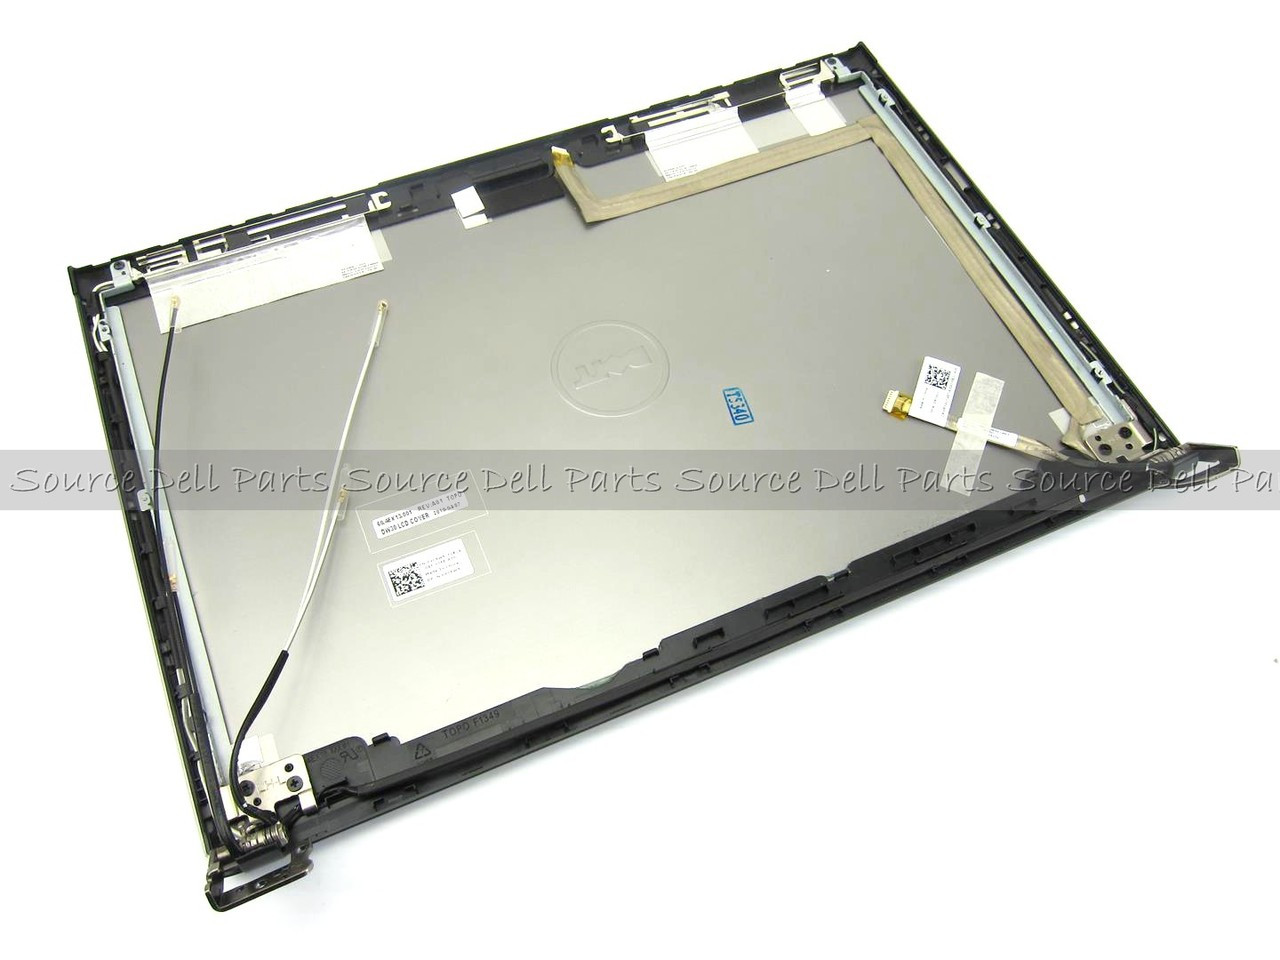 Dell Vostro 3300 13.3" LCD Back Cover Lid W/ Hinges - YCFW5